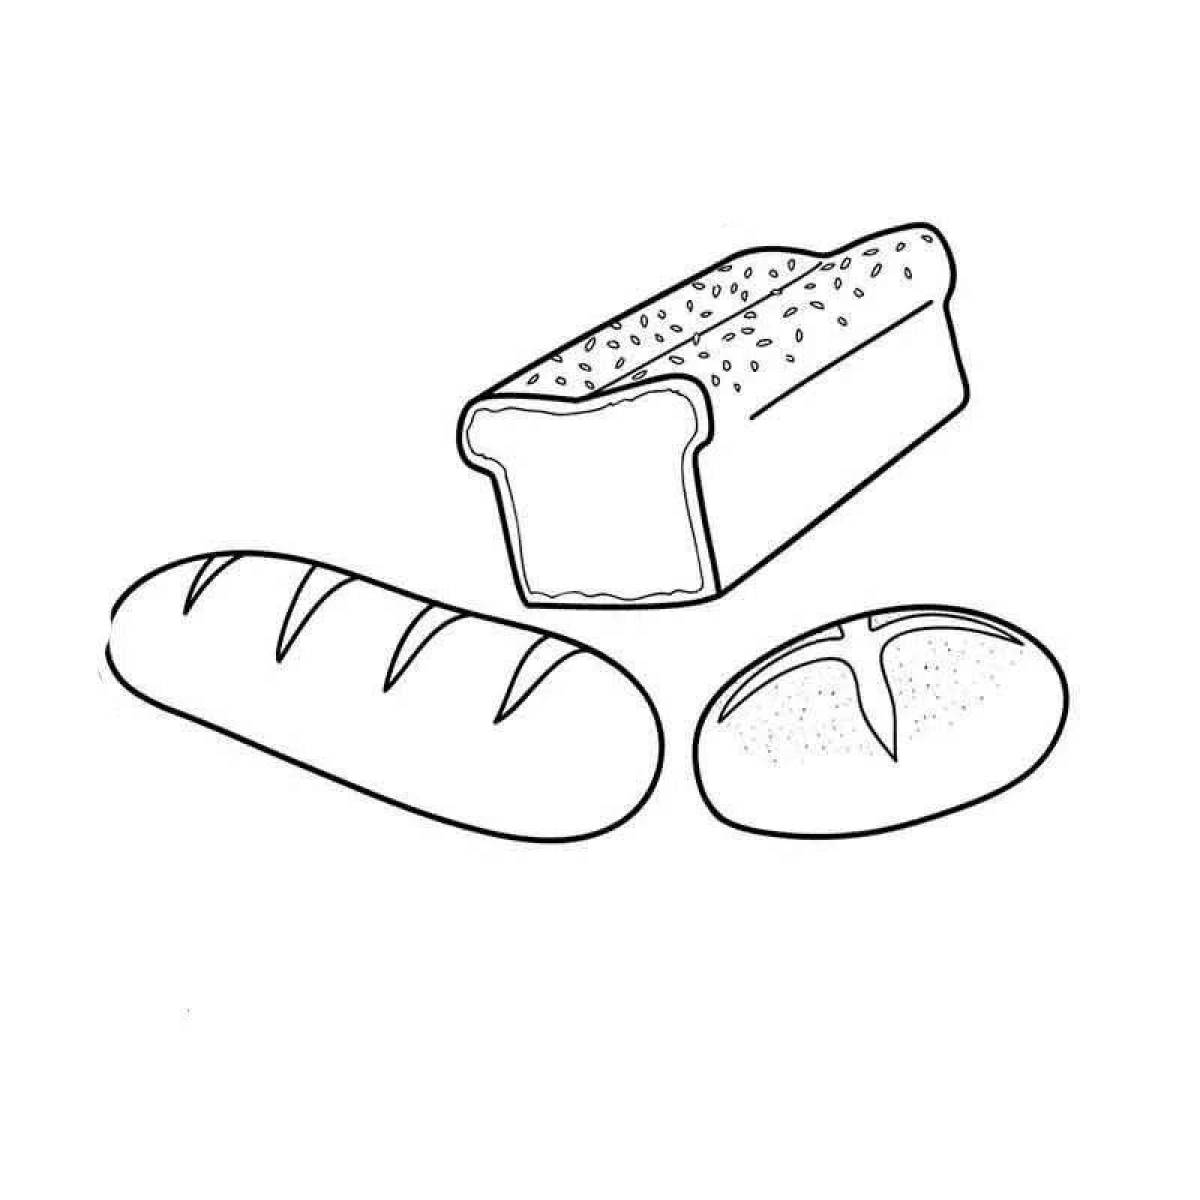 Coloring book appetizing pastries for children